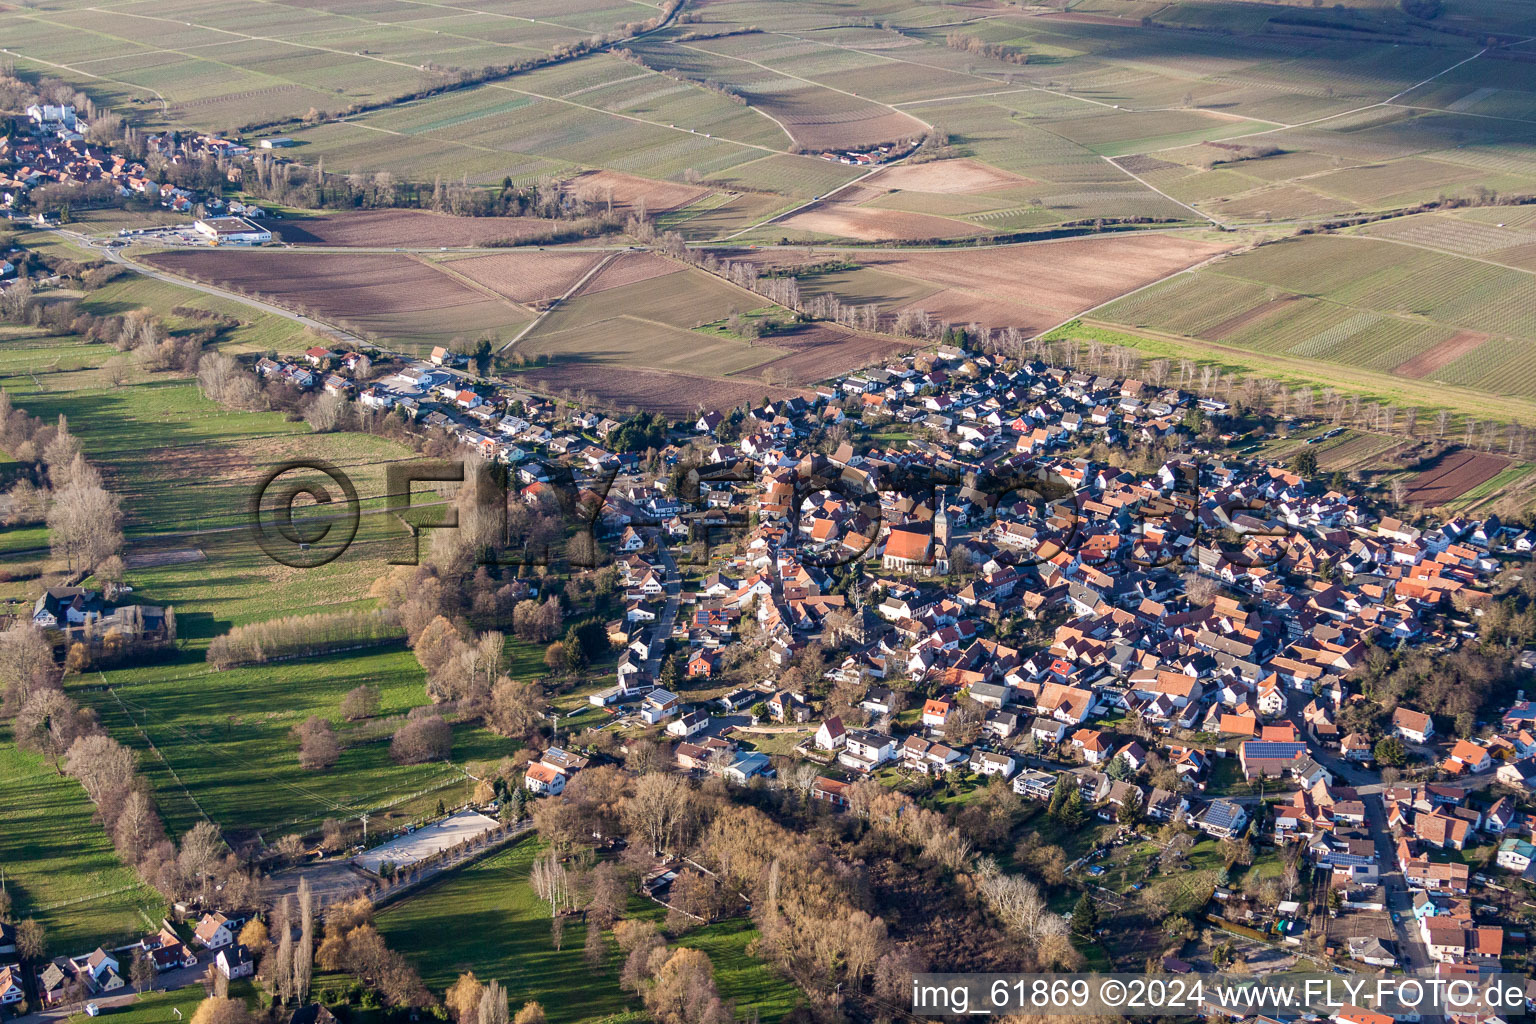 Town View of the streets and houses of the residential areas in the district Ingenheim in Billigheim-Ingenheim in the state Rhineland-Palatinate viewn from the air